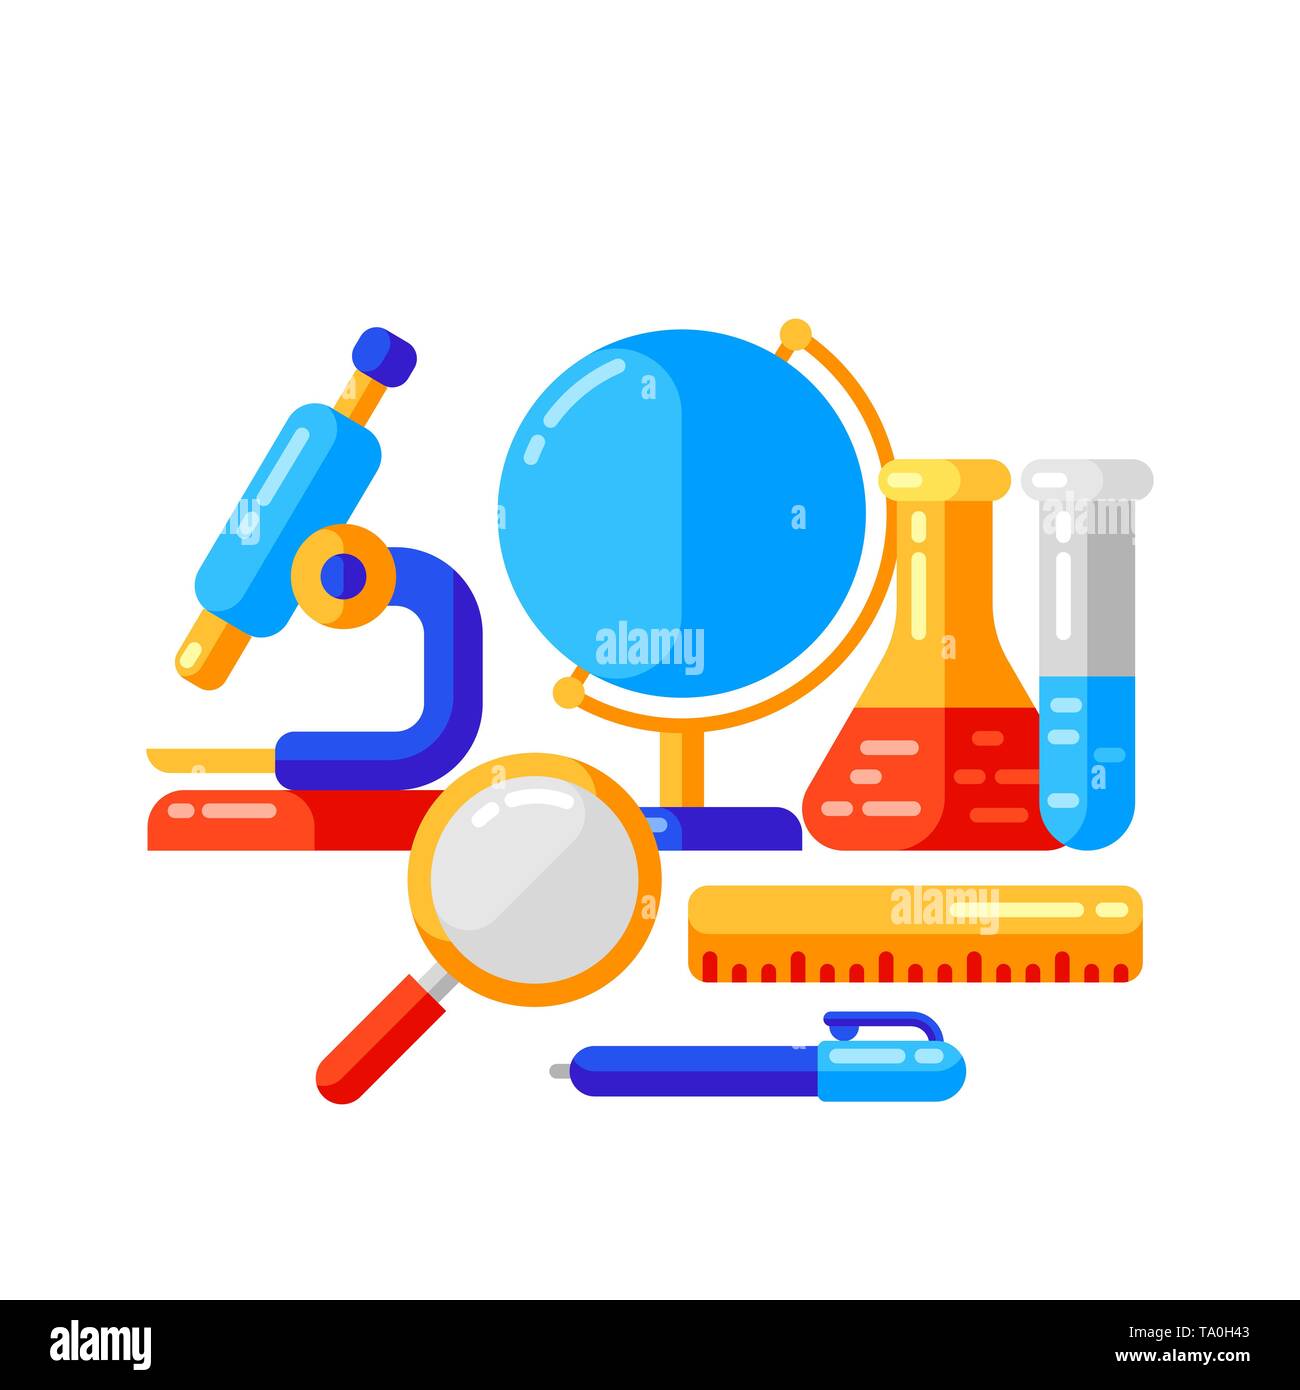 School background with education icons and symbols. Illustration in trendy flat style. Stock Vector